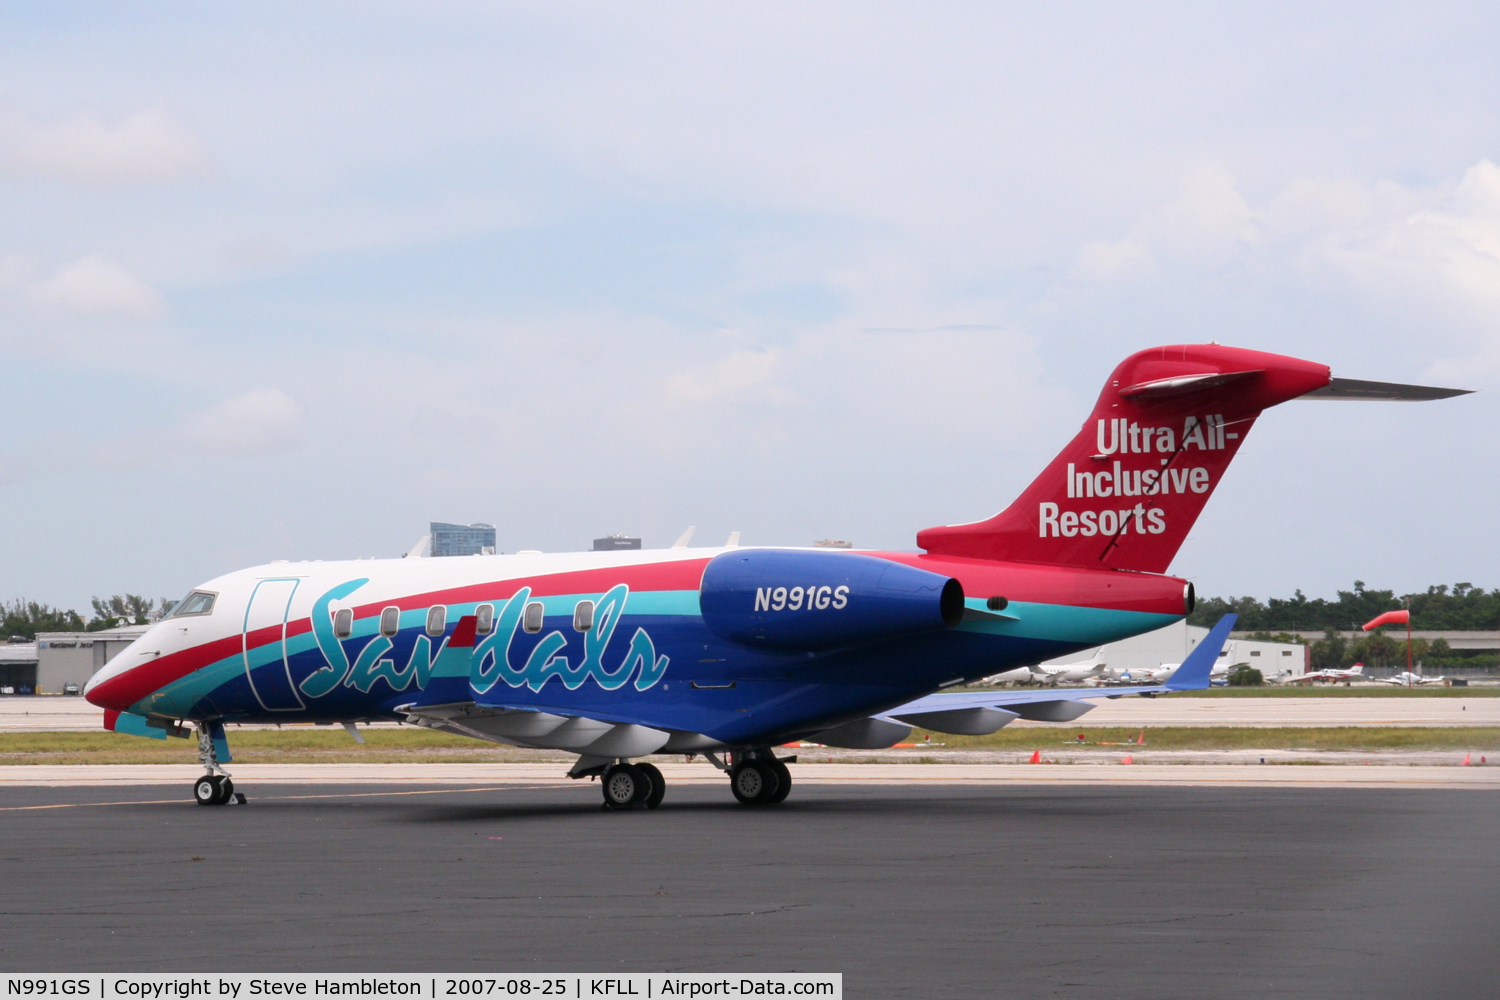 N991GS, 2006 Bombardier Challenger 300 (BD-100-1A10) C/N 20099, Looking very colorful at Fort Lauderdale